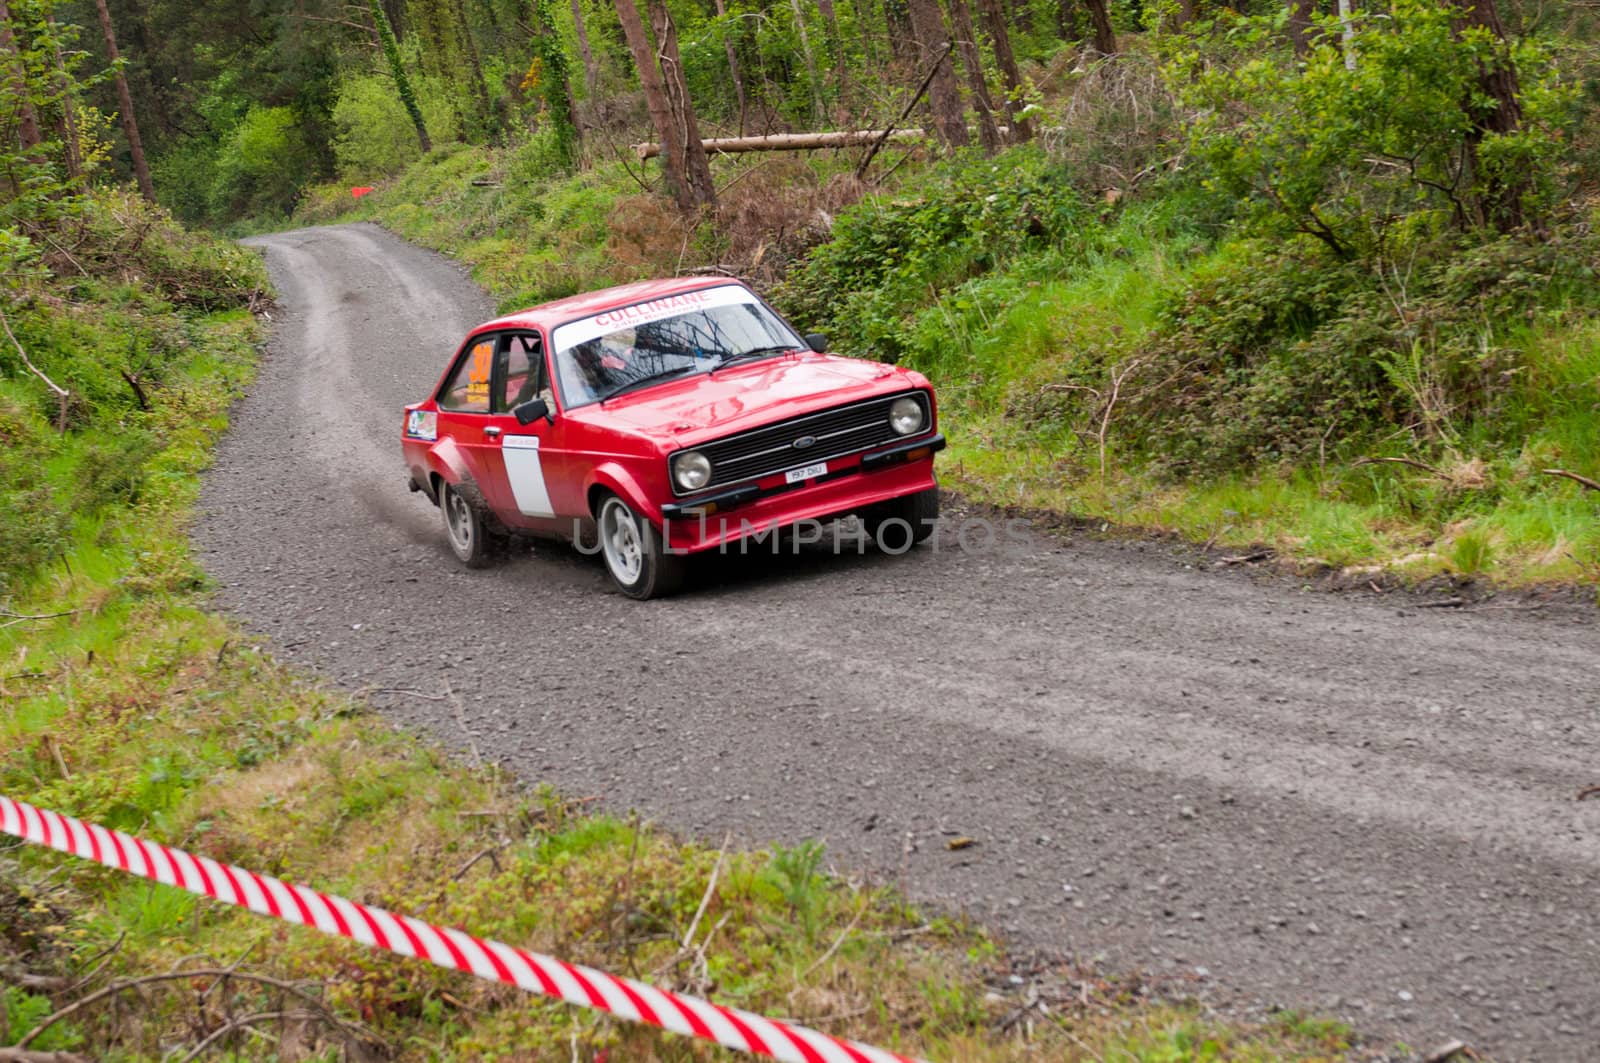 MALLOW, IRELAND - MAY 19: J. Cullinane driving Ford Escort at the Jim Walsh Cork Forest Rally on May 19, 2012 in Mallow, Ireland. 4th round of the Valvoline National Forest Rally Championship.